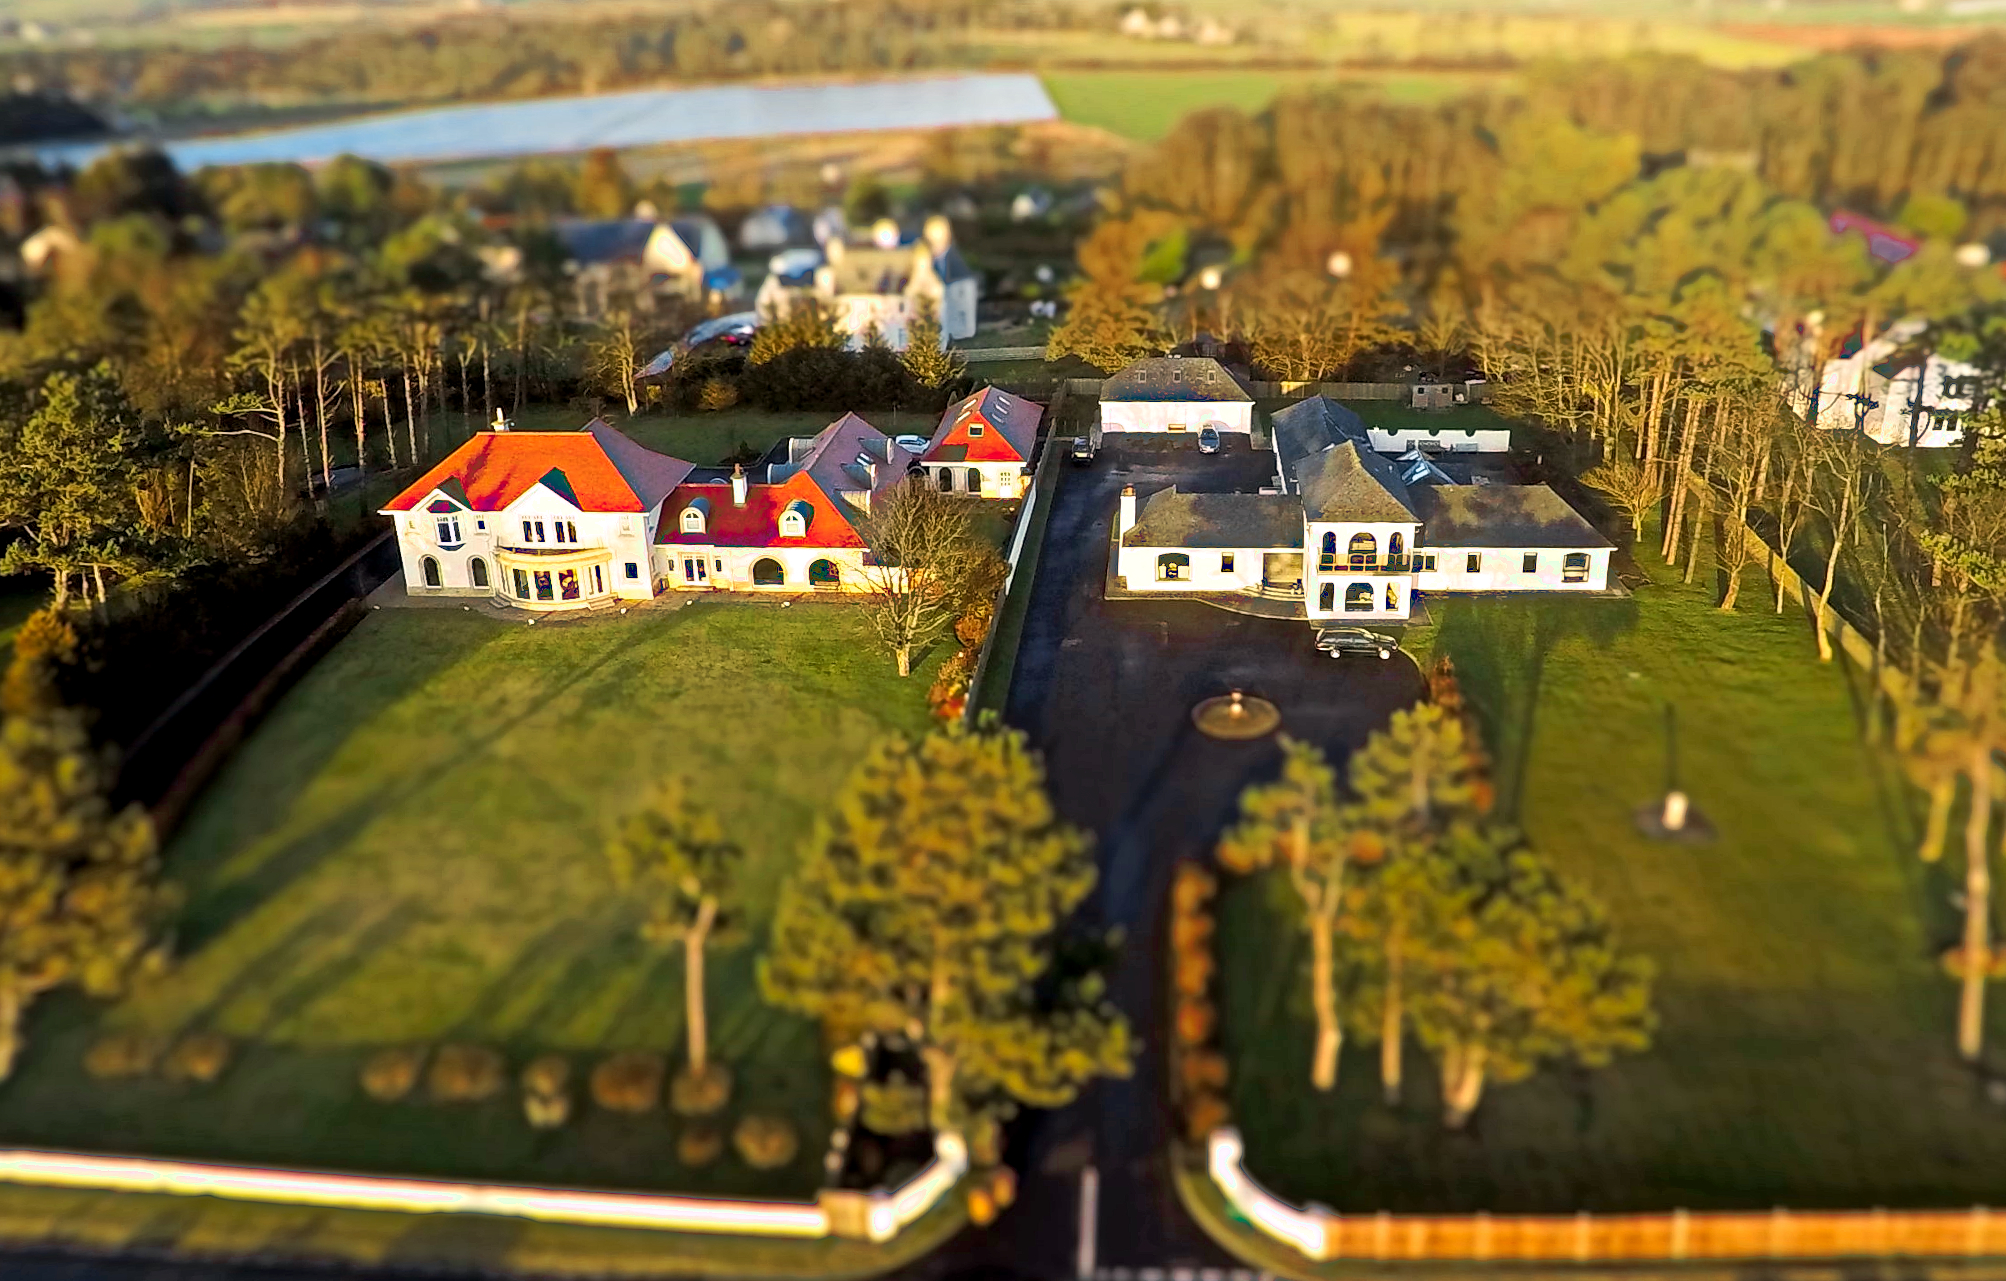 Drone property marketing imagery